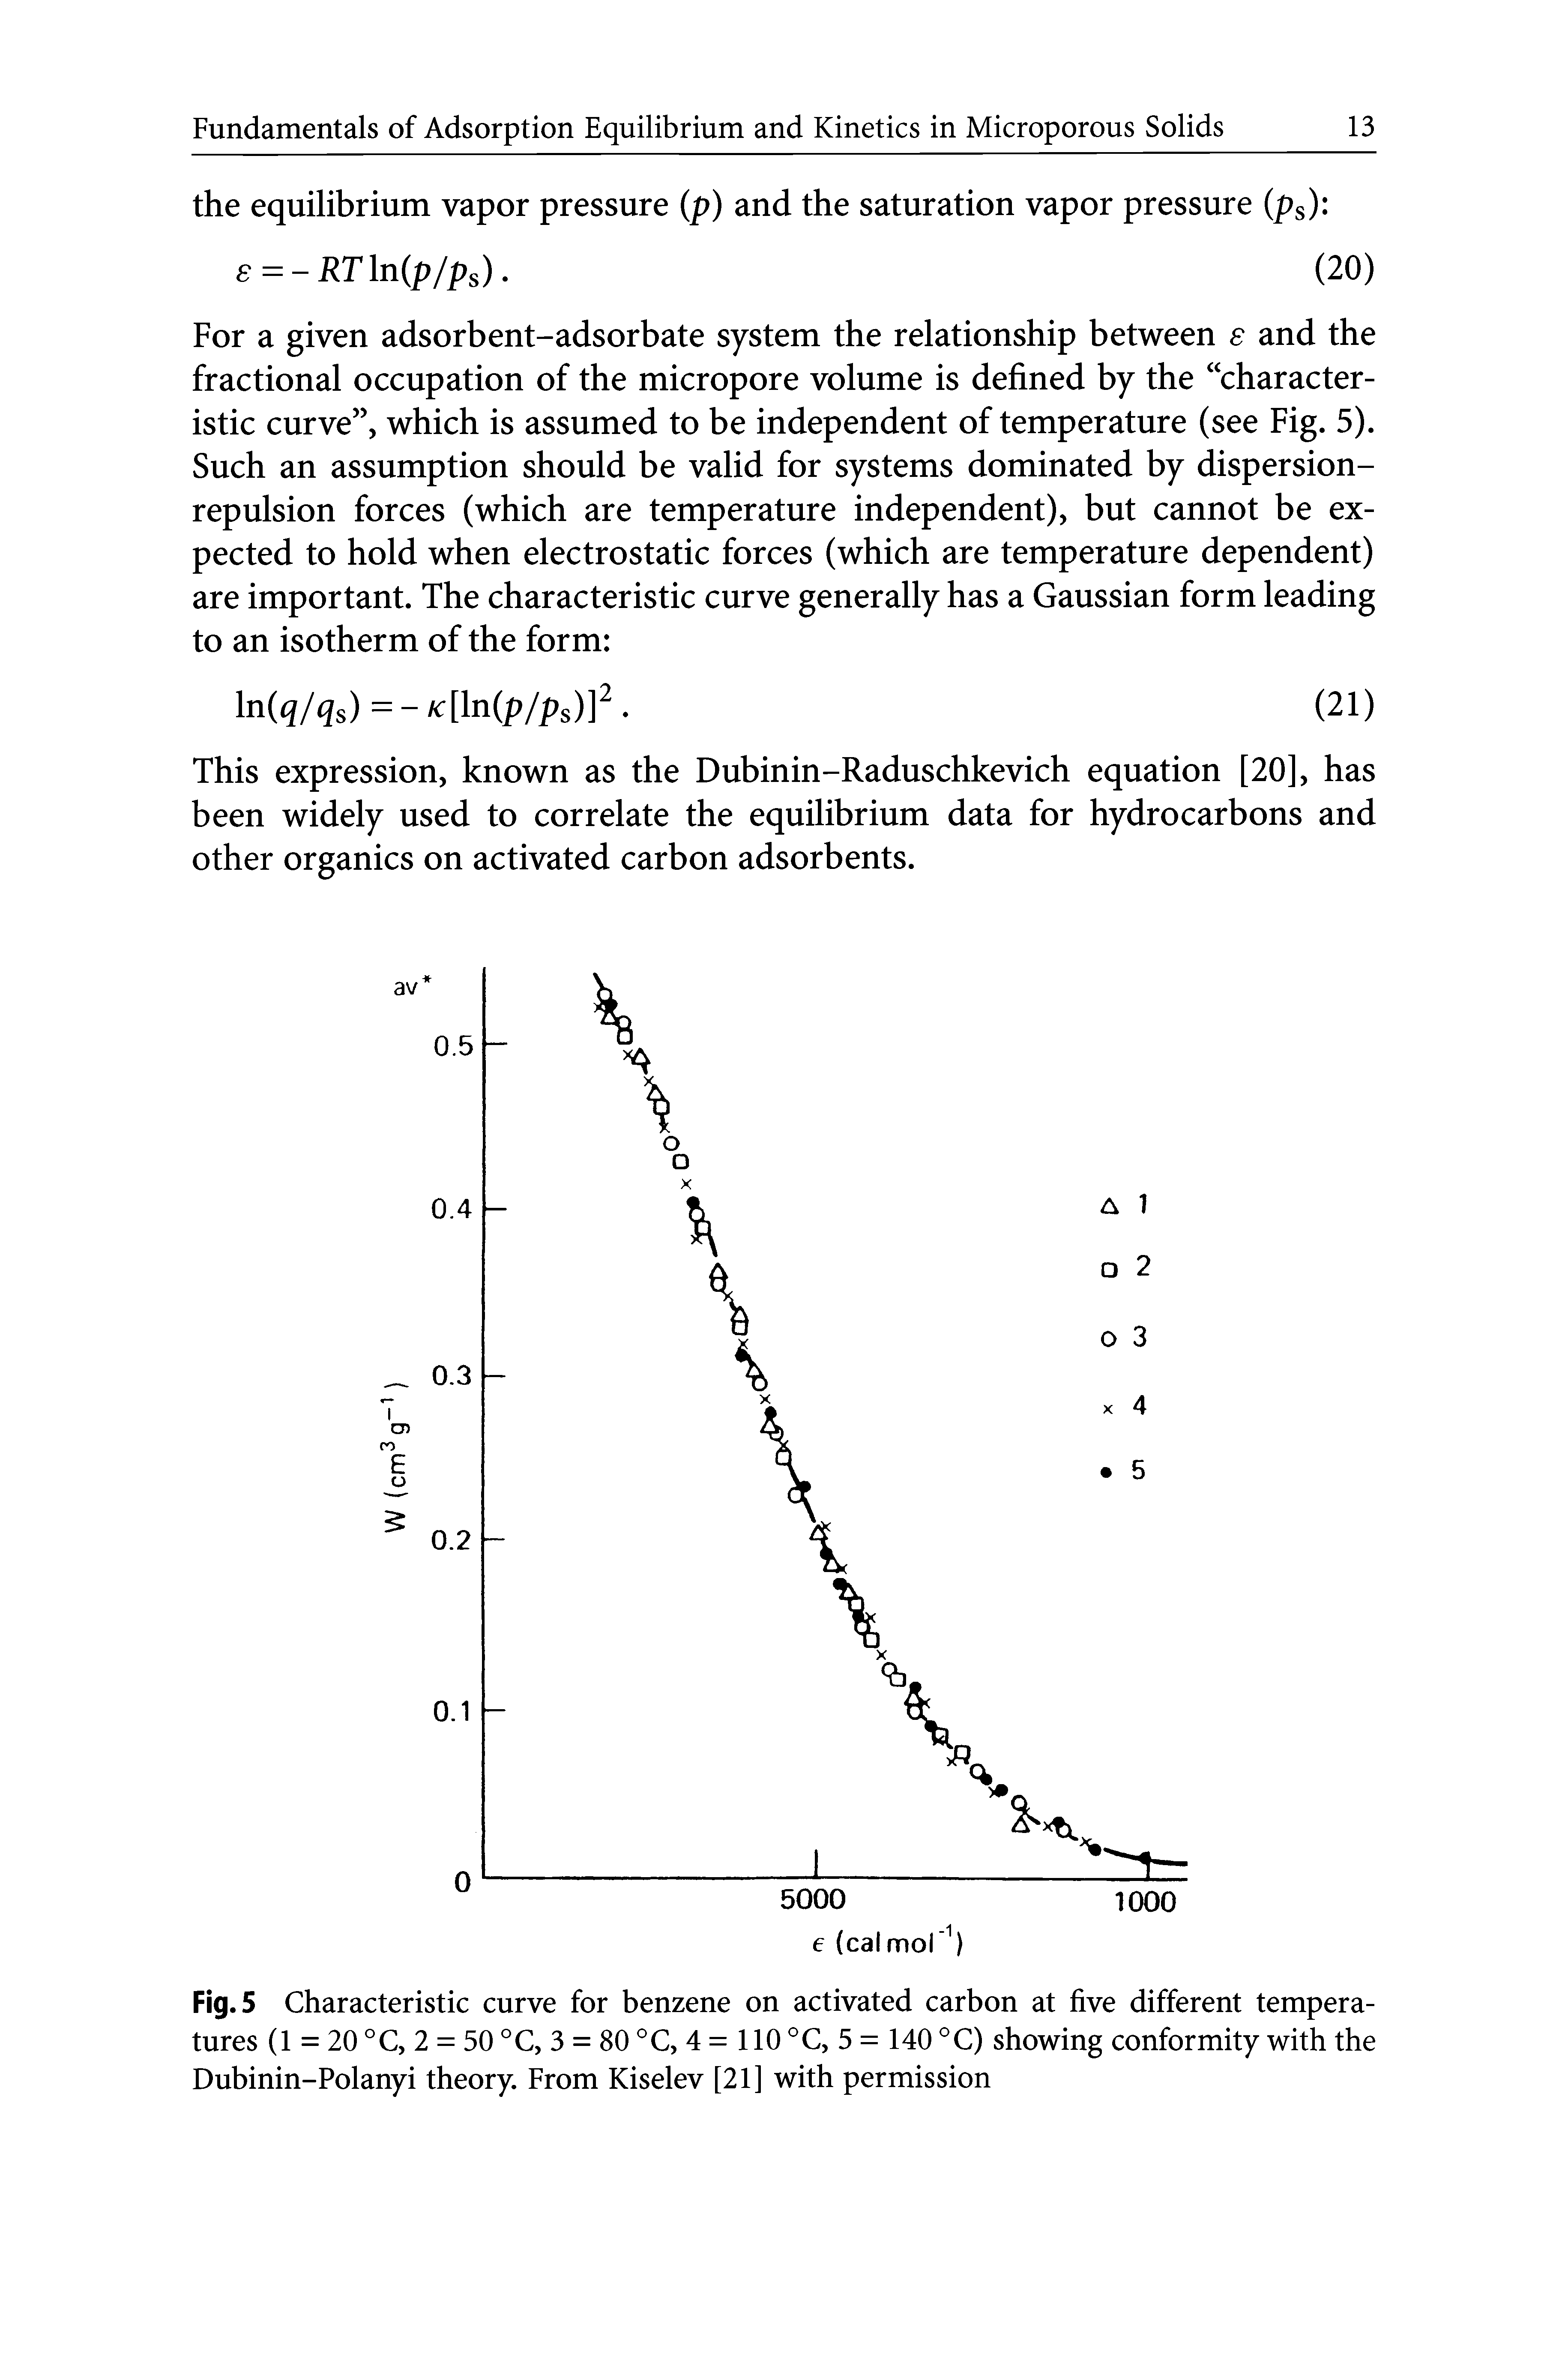 Fig. 5 Characteristic curve for benzene on activated carbon at five different temperatures (1 = 20 °C, 2 = 50 °C, 3 = 80 °C, 4 = 110 °C, 5 = 140 °C) showing conformity with the Dubinin-Polanyi theory. From Kiselev [21] with permission...